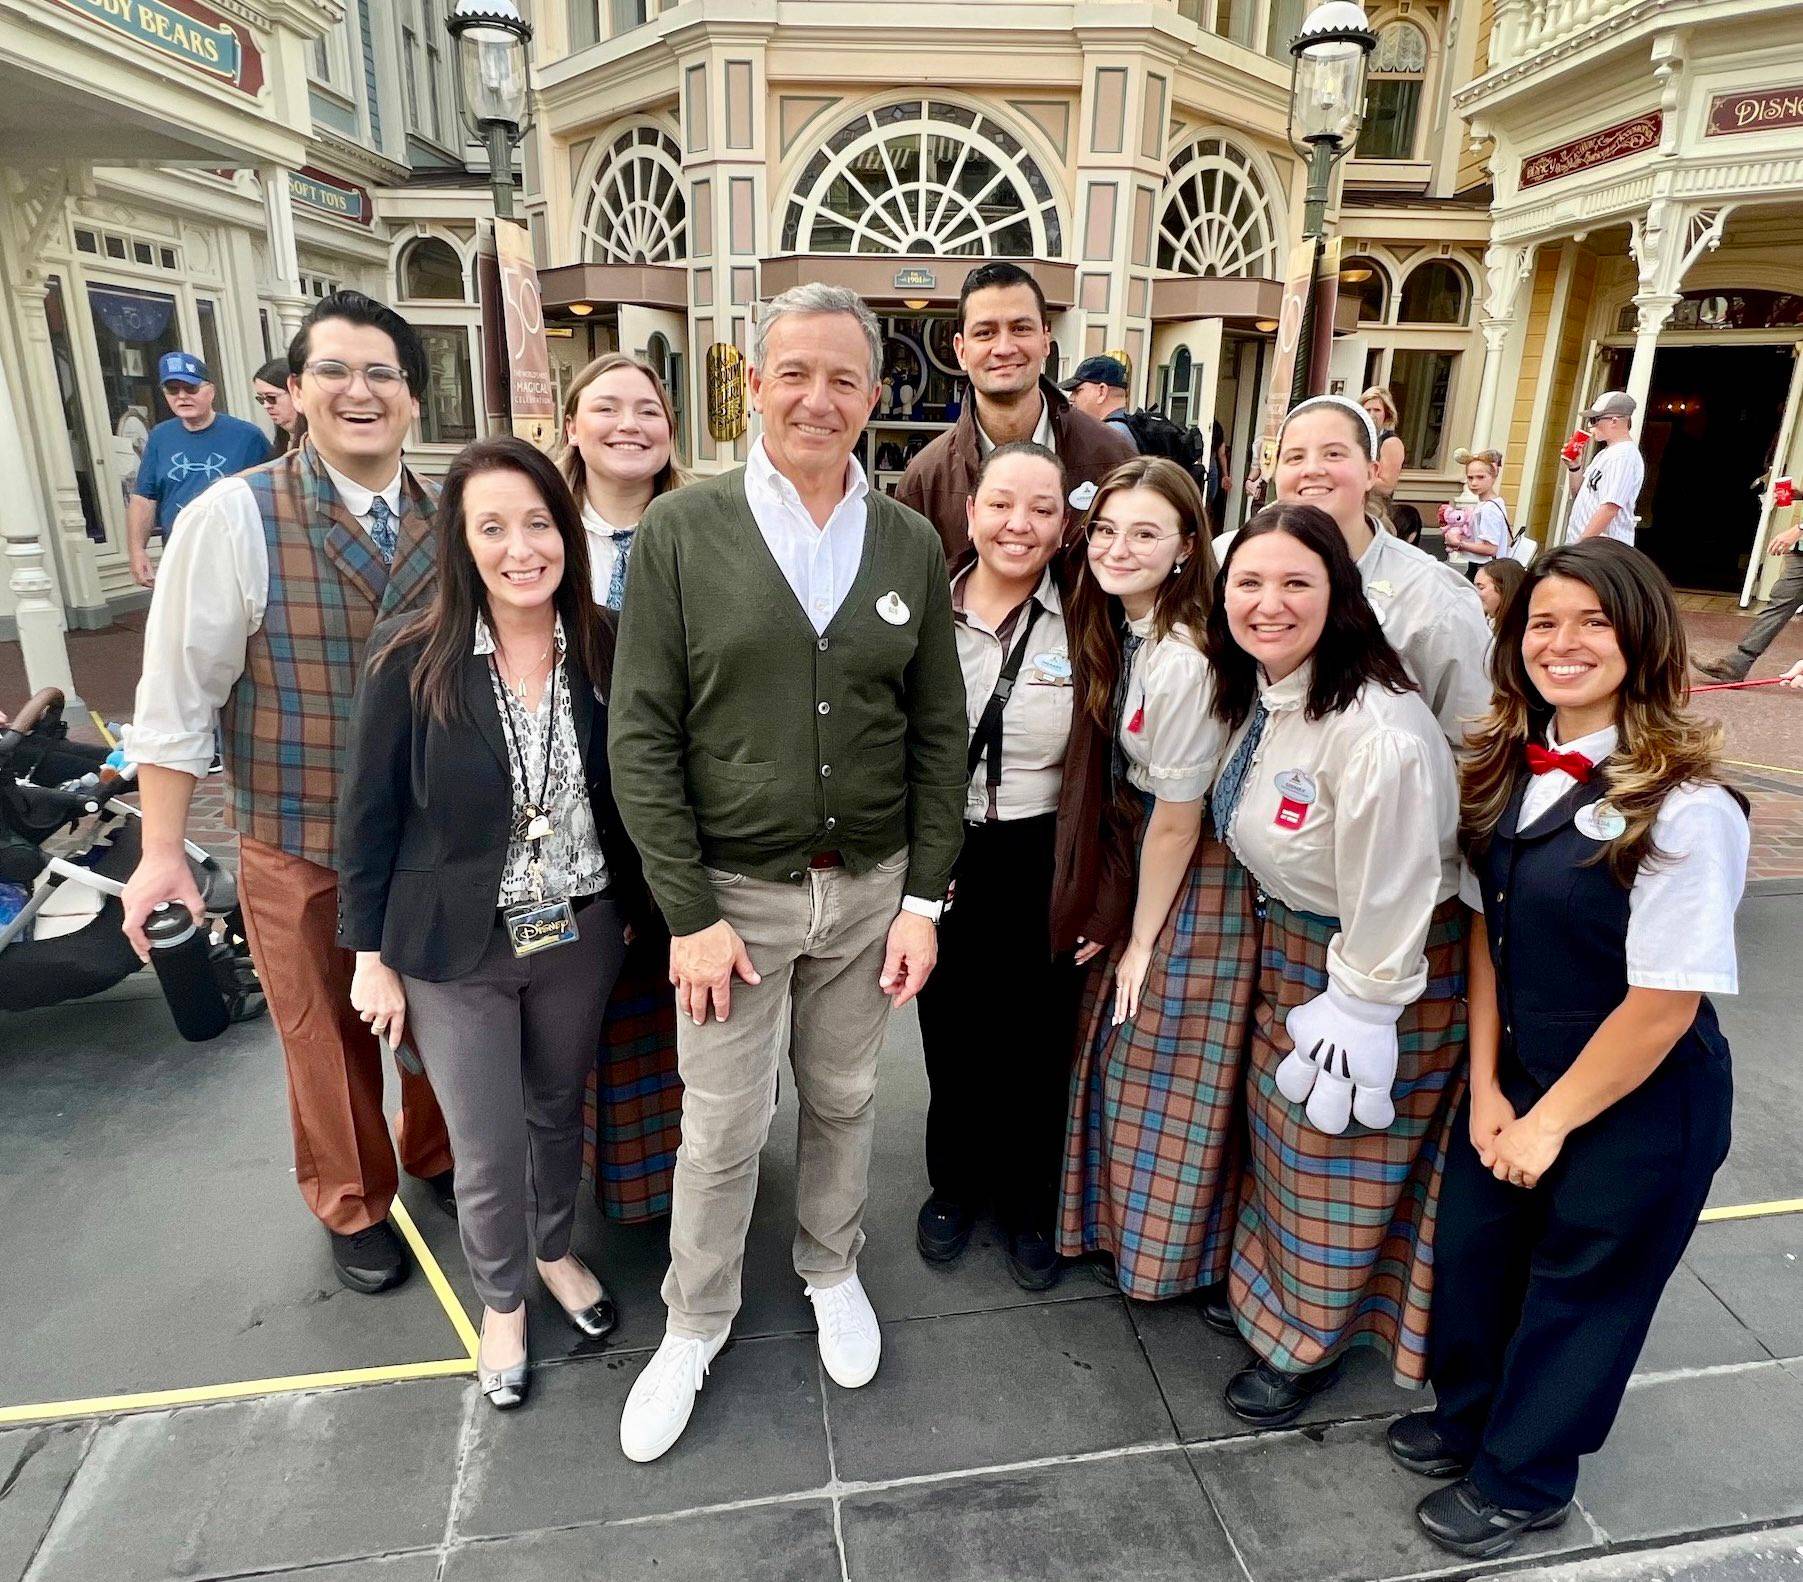 Bob Iger was at Walt Disney World earlier this year for the first time since returning as Disney CEO